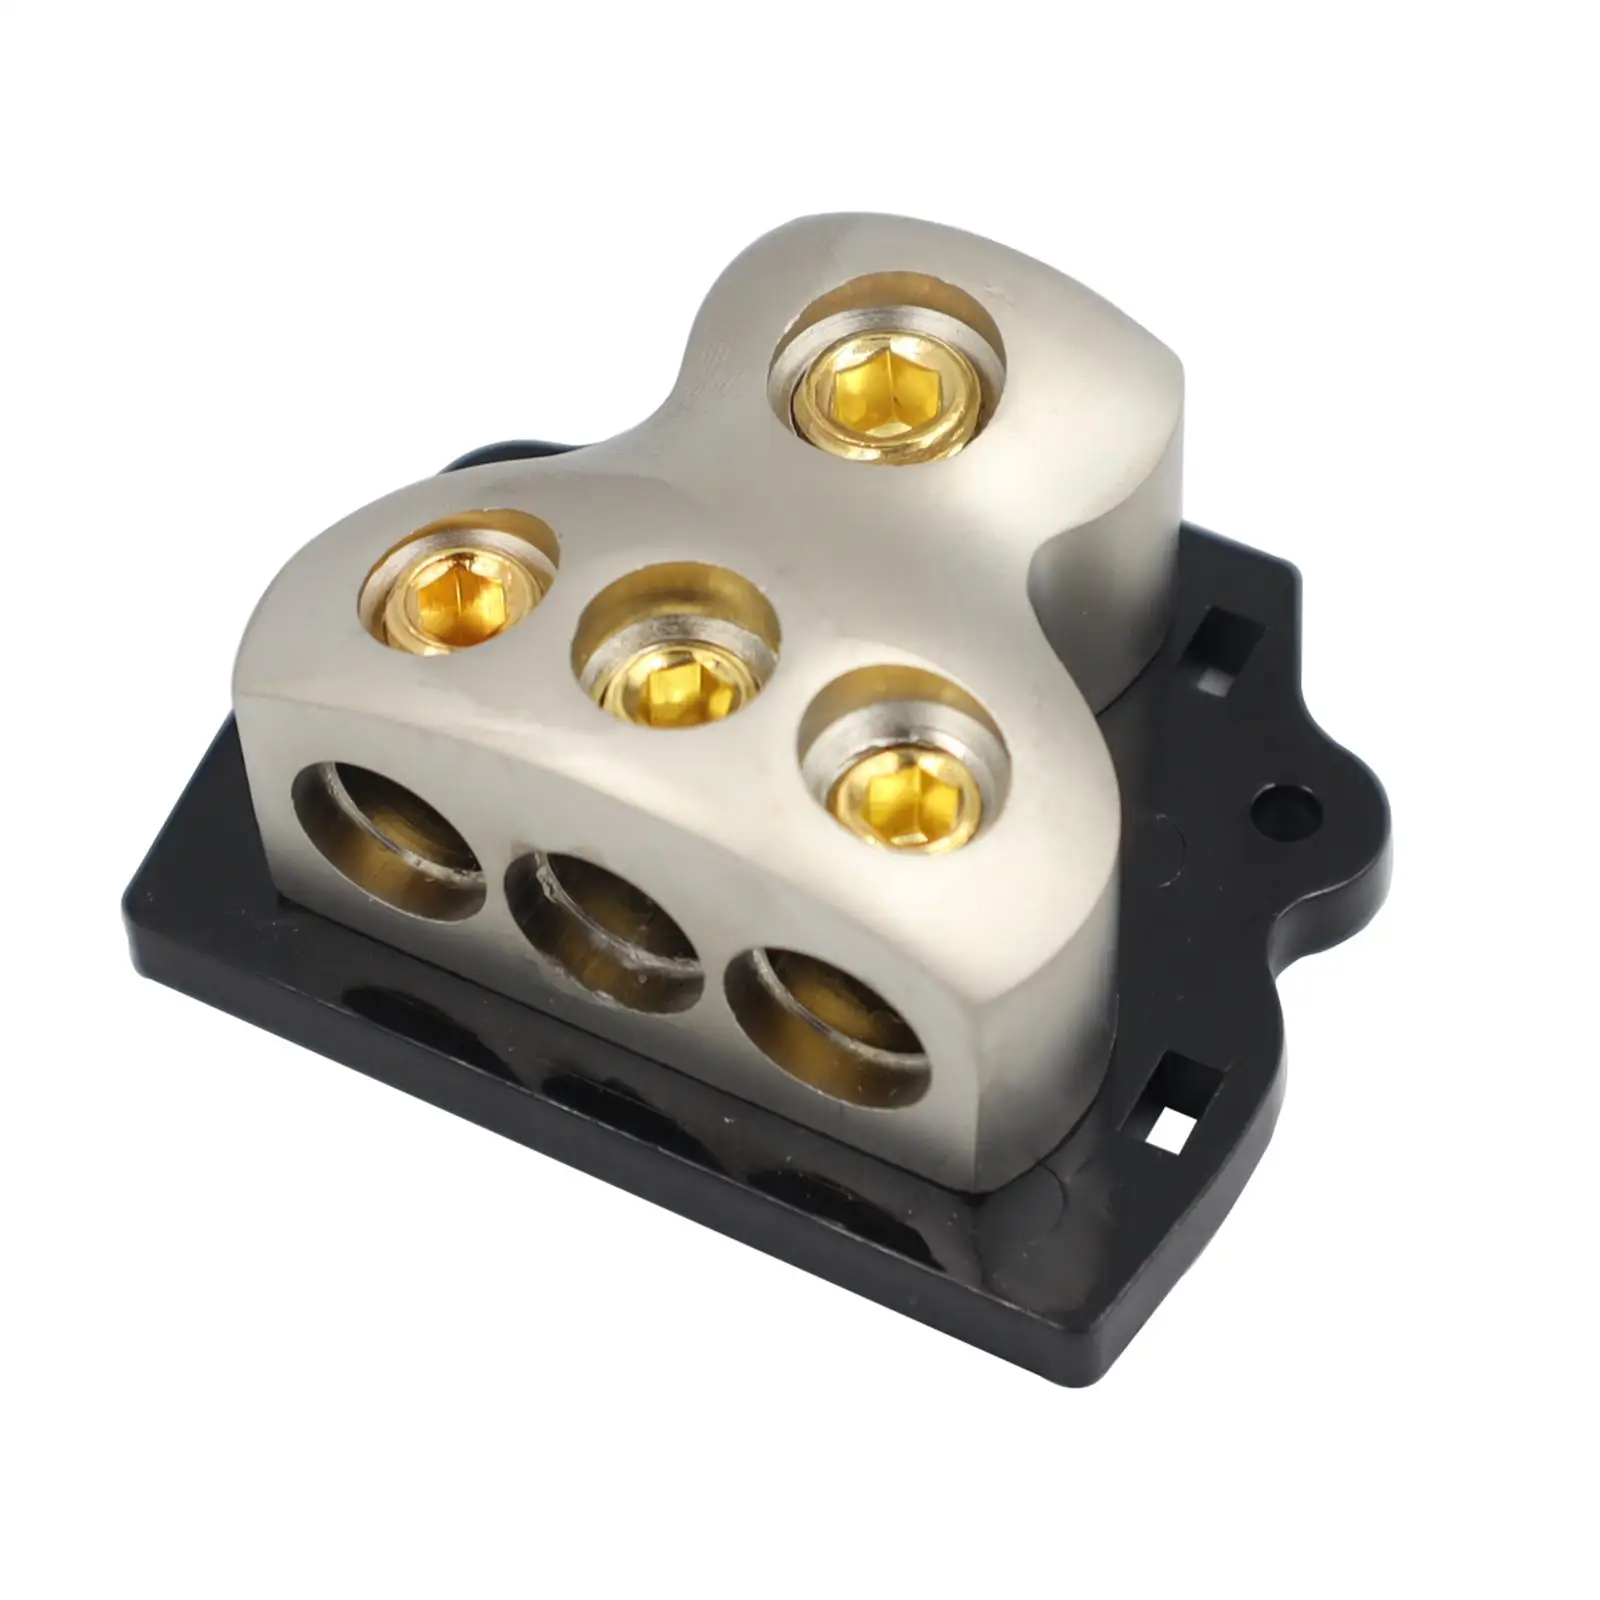 3 Way Amp Power Ground Distributor Connecting Block 1x 0 Gauge in 3x 4 Gauge Out Fit for Car Audio Amplifier Connection Replace